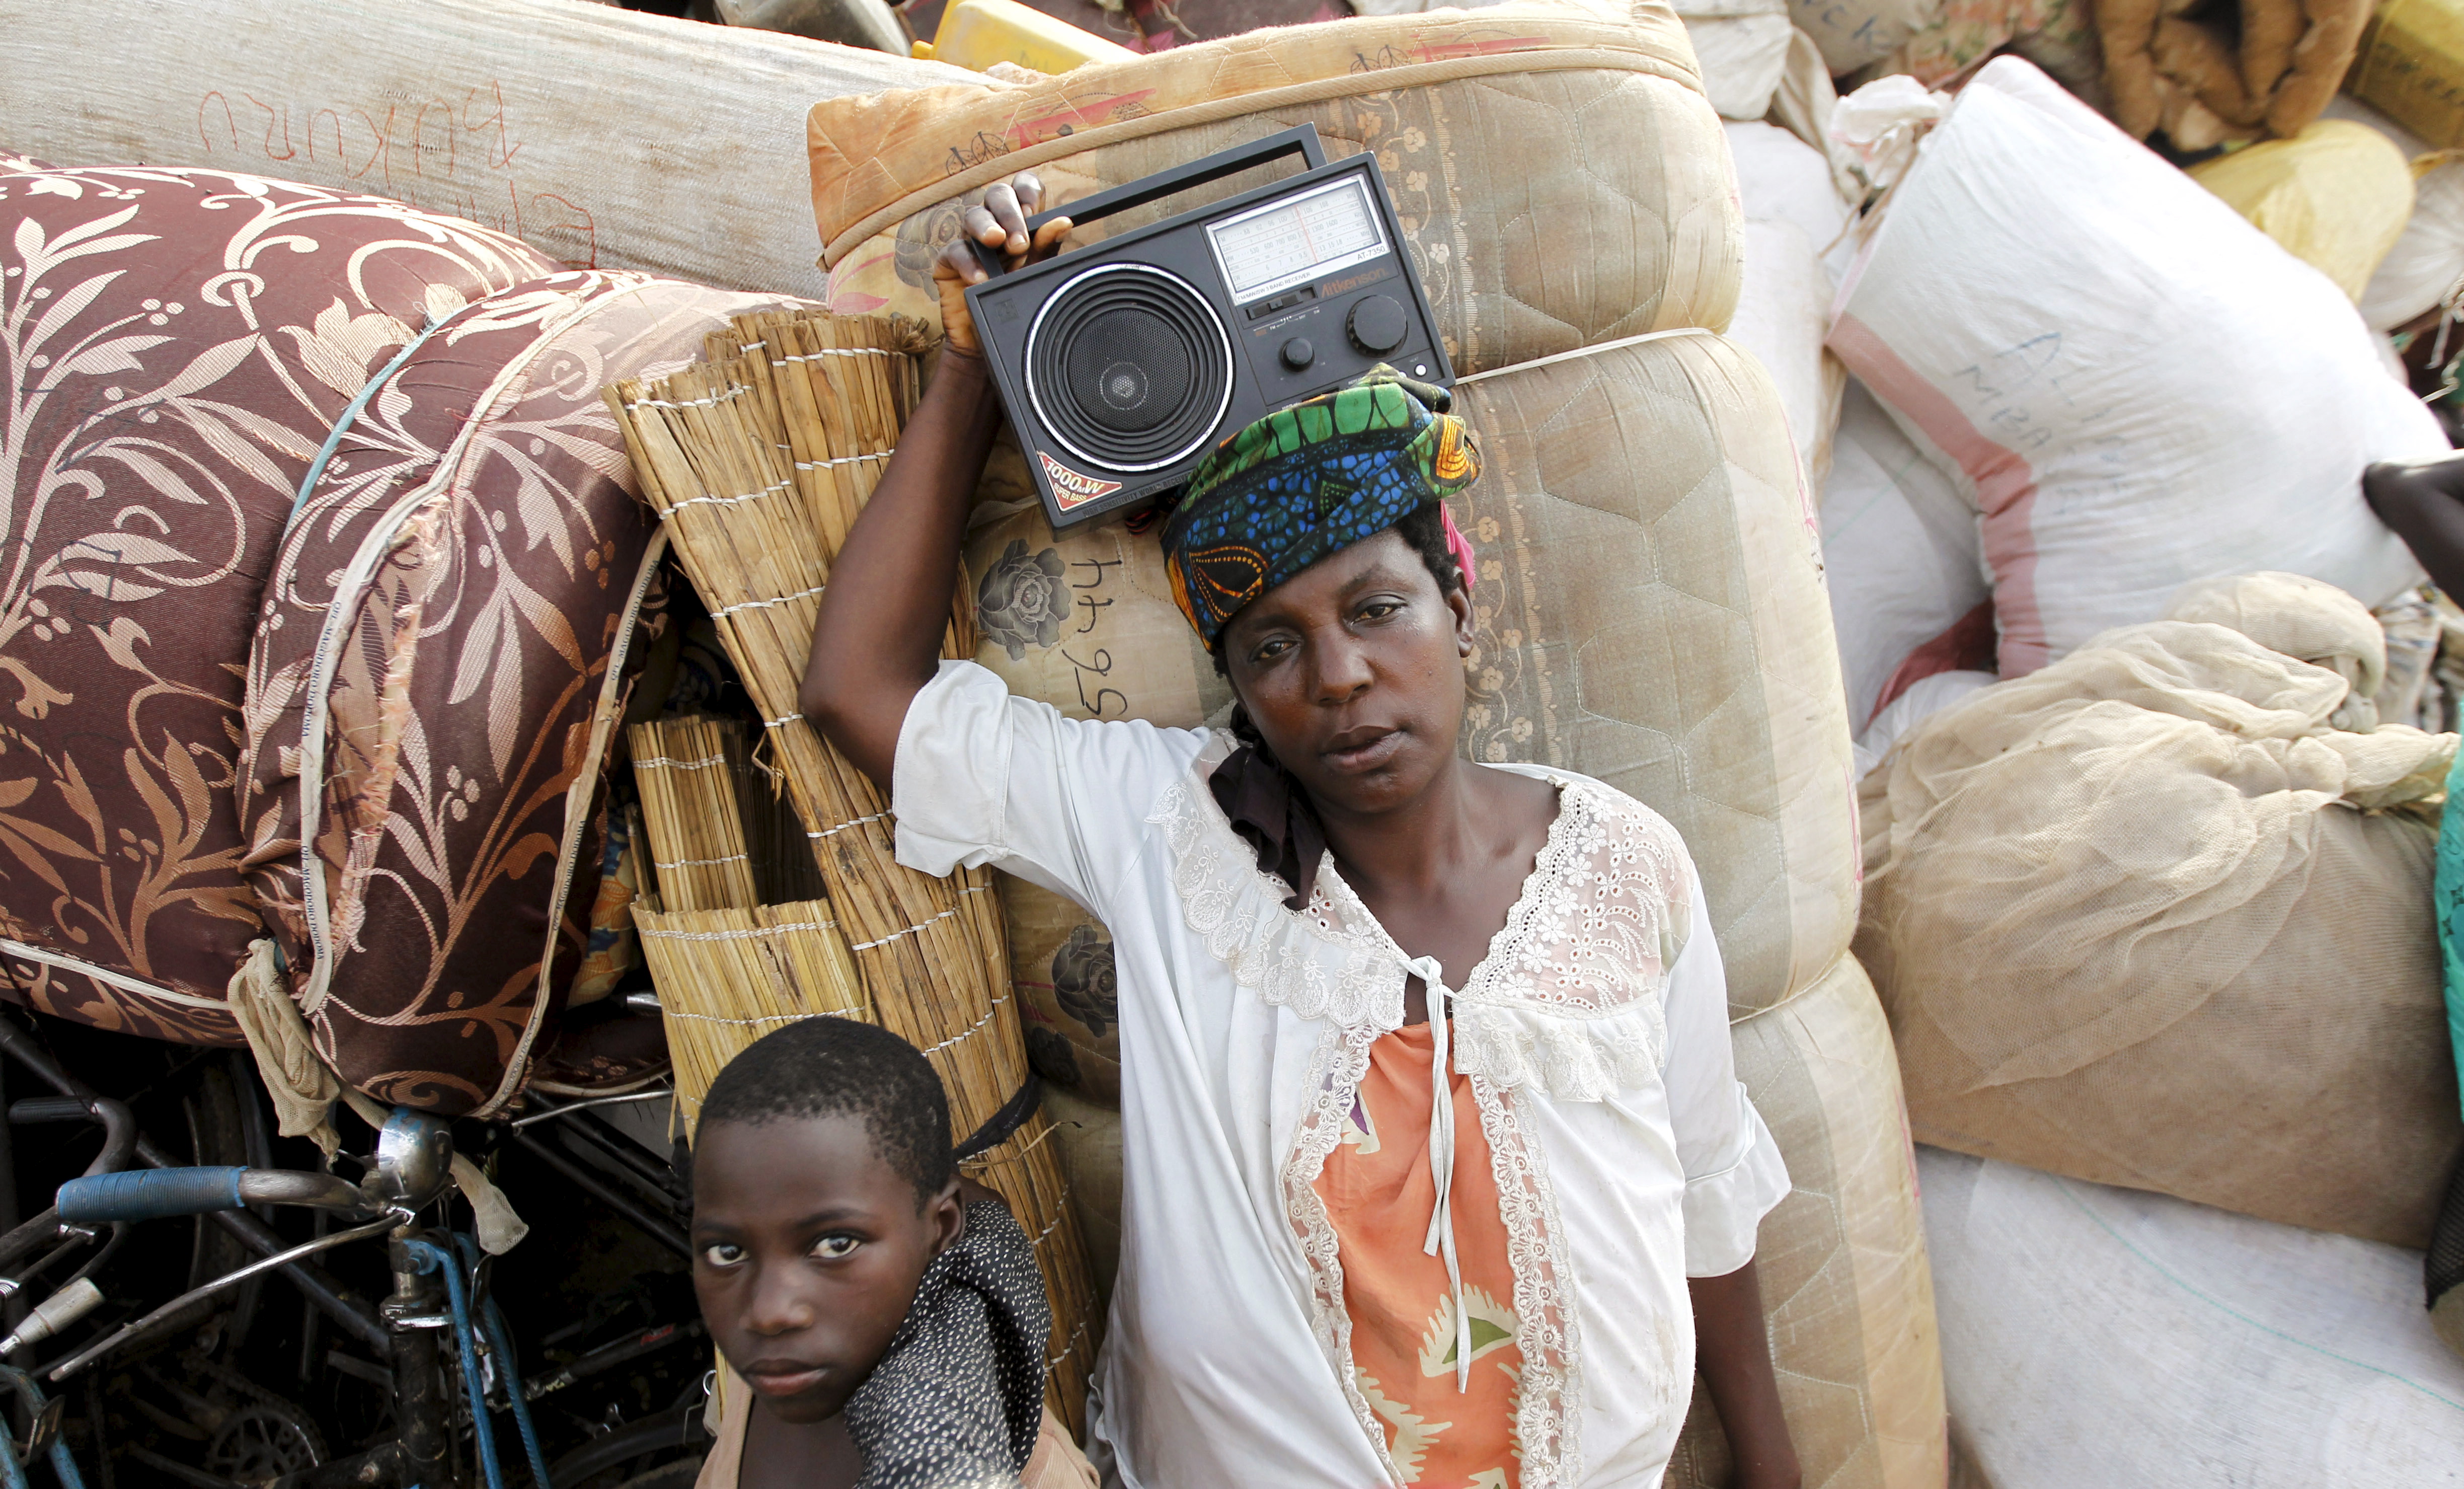 A Burundian refugee woman carries a radio as she rests with her belongings on the shores of Lake Tanganyika in Kagunga village in Kigoma region in western Tanzania, 18 May 2015